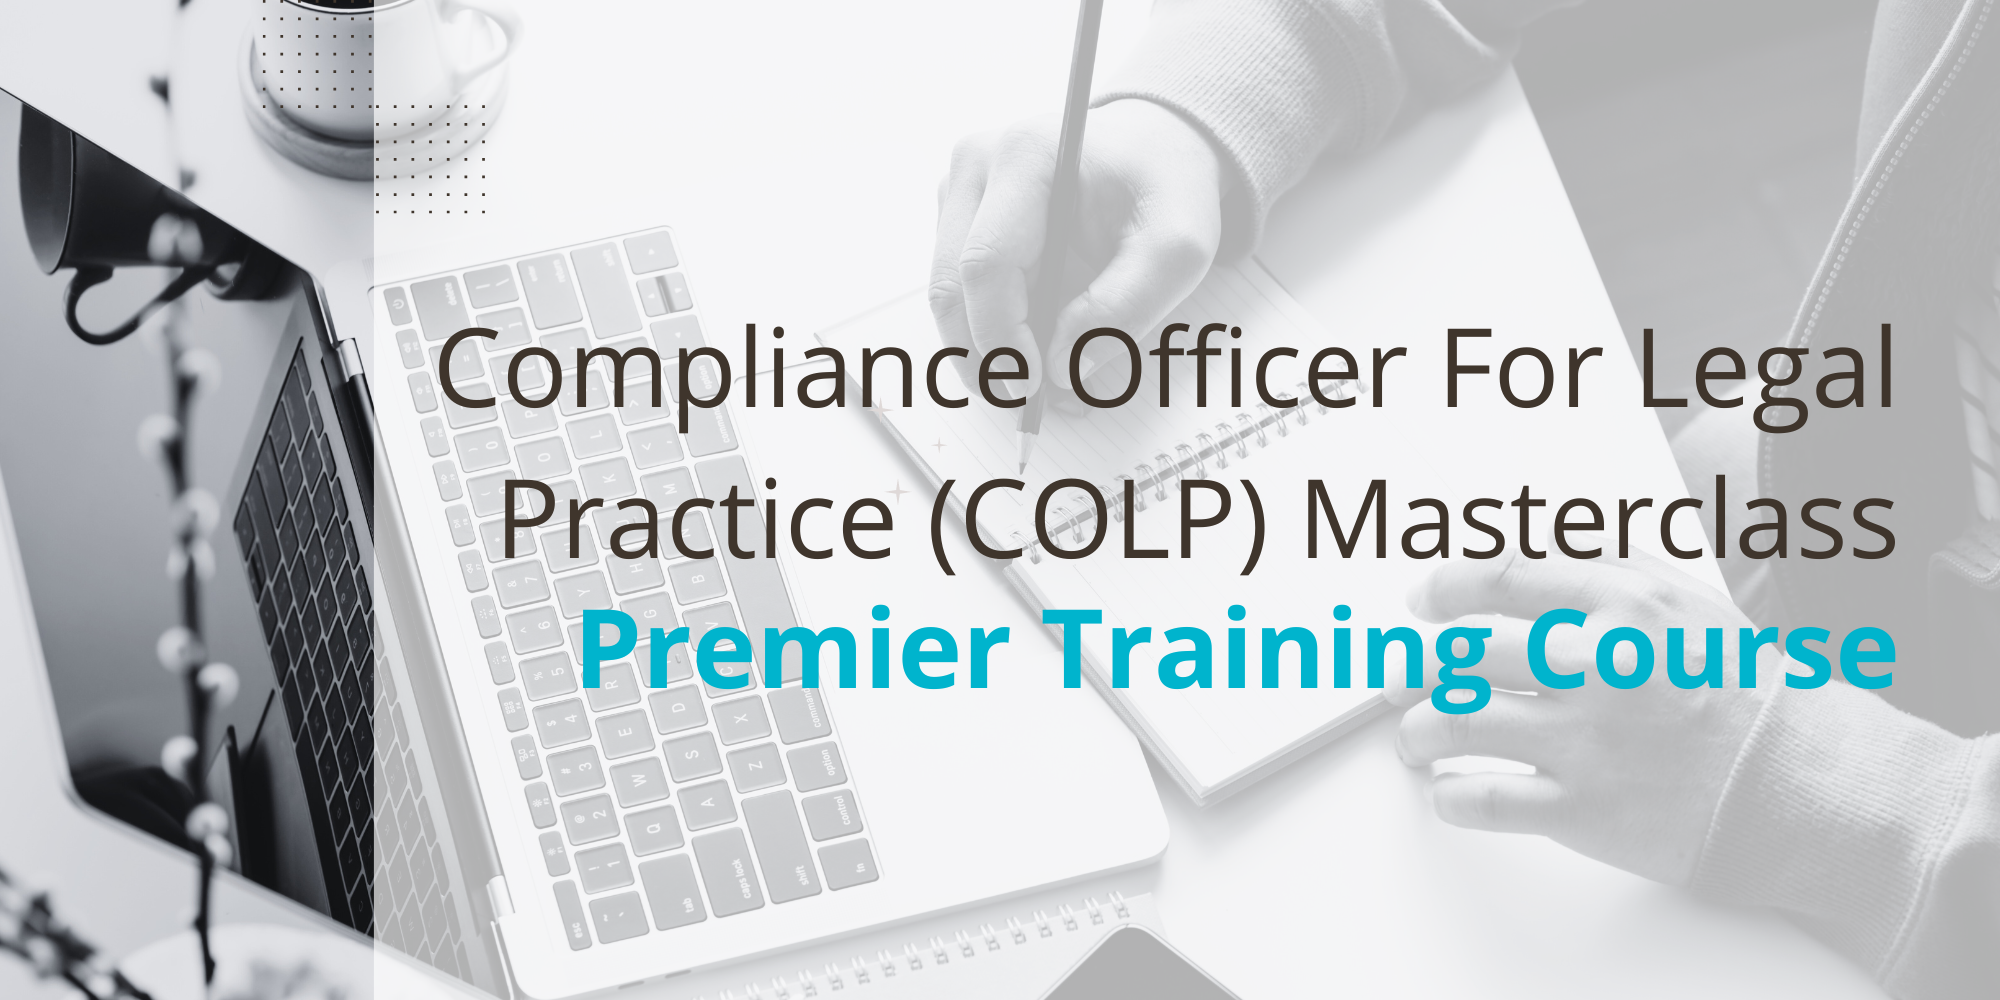 Compliance Officer For Legal Practice (COLP) Masterclass Course